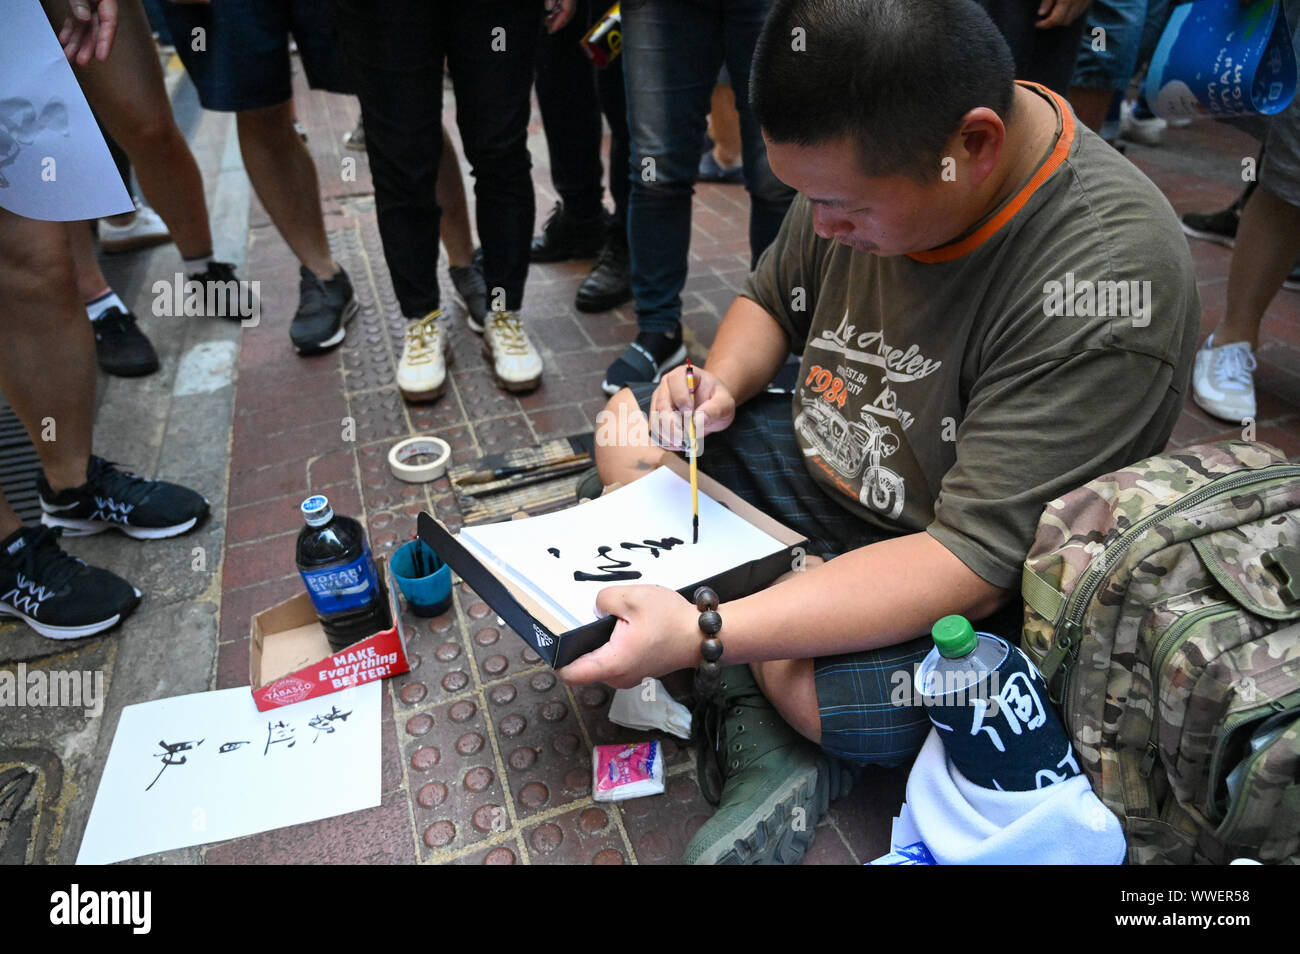 Hong Kong, Hong Kong Sar. 15th Sep, 2019. A man paints Chinese characters such as 'Justice' and 'Conscience' with calligraphy to hand out at a protest march in Hong Kong on September 15, 2019. Photo by Thomas Maresca/UPI Credit: UPI/Alamy Live News Stock Photo